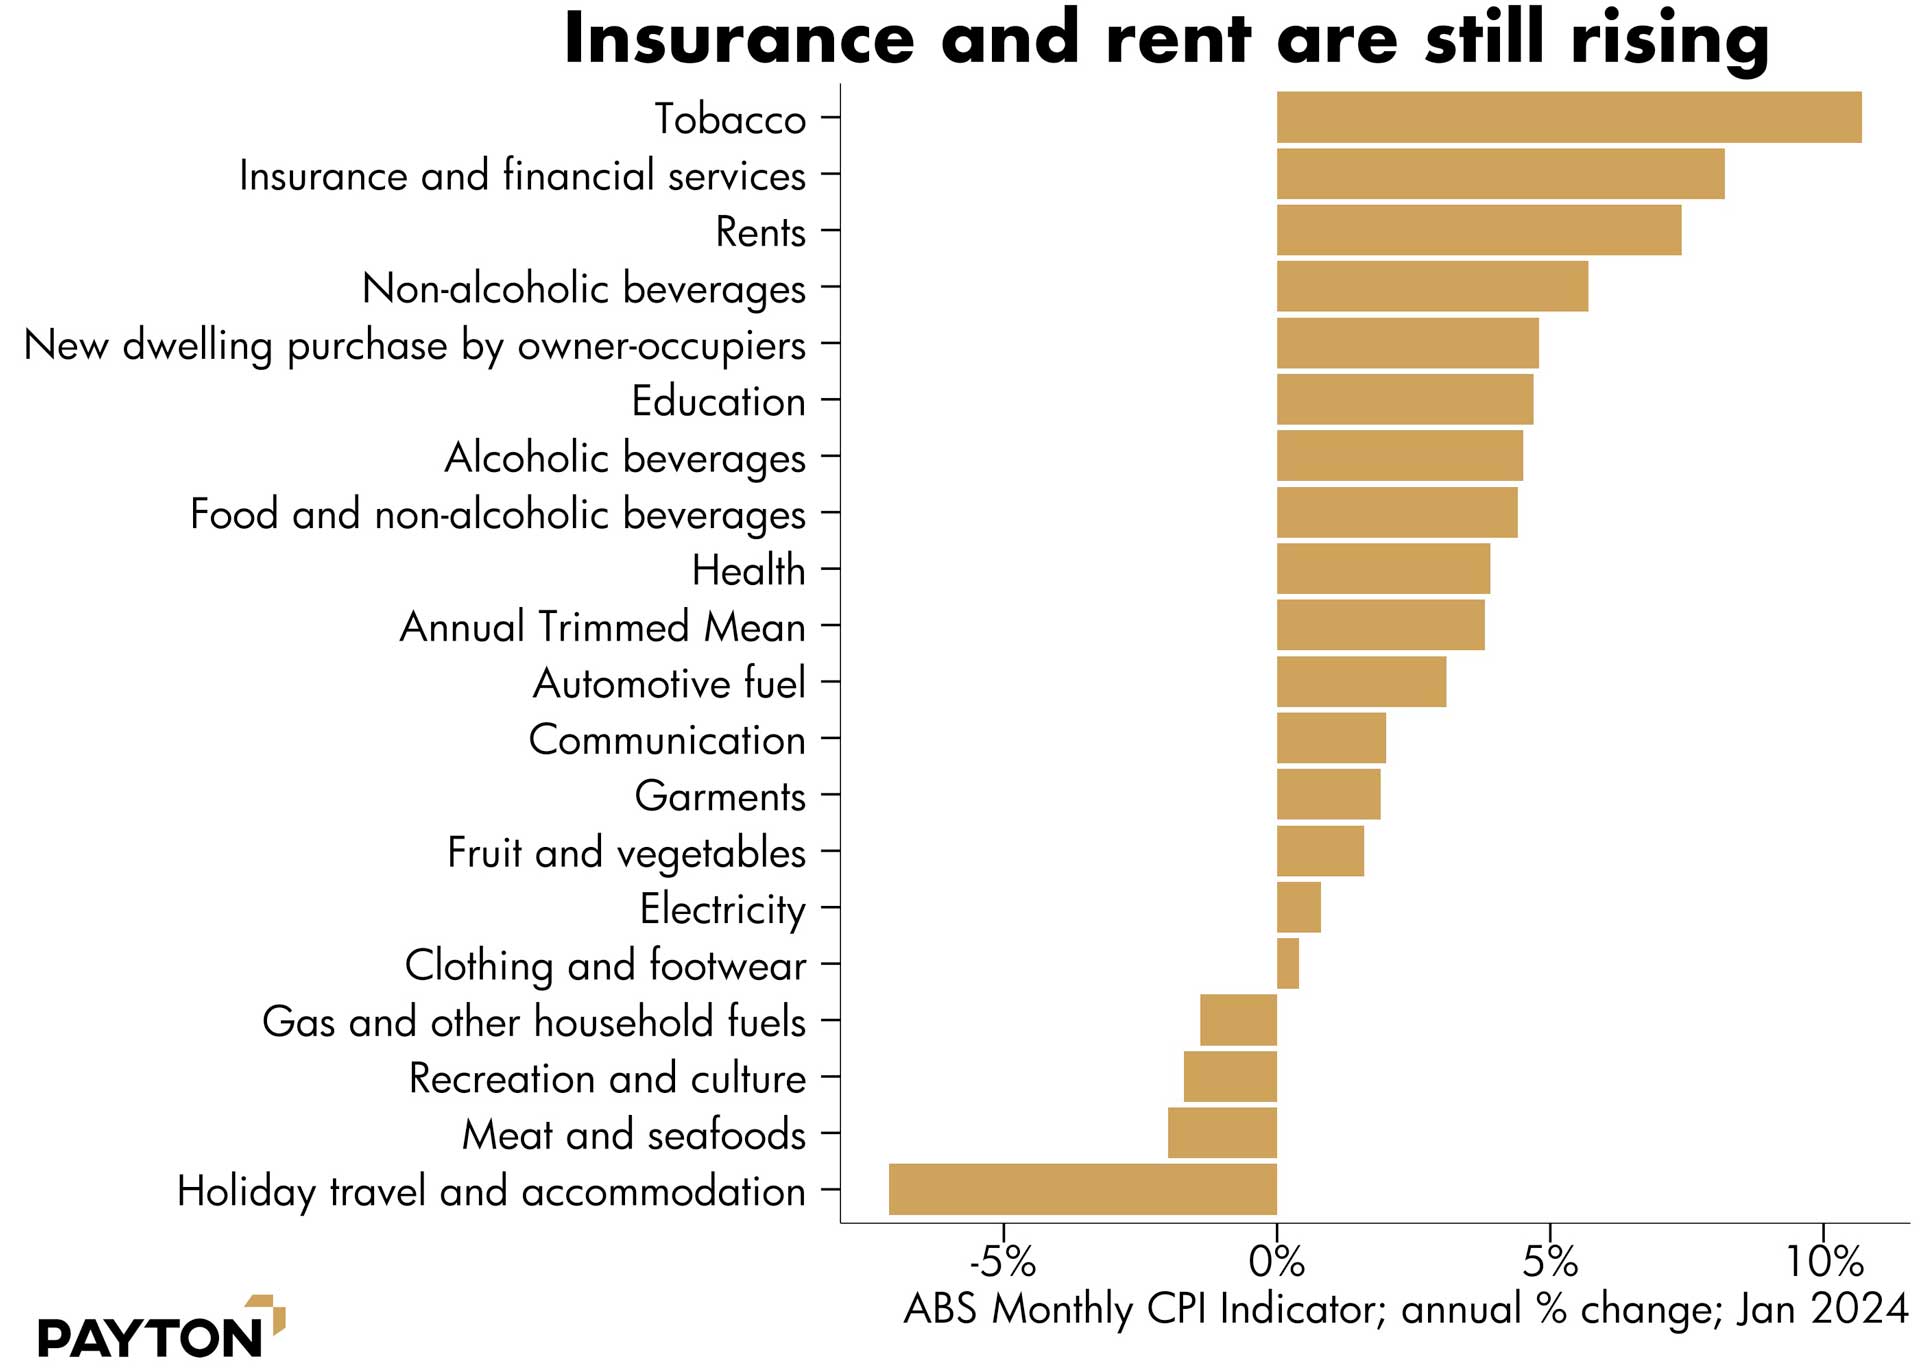 Insurance and rent are still rising